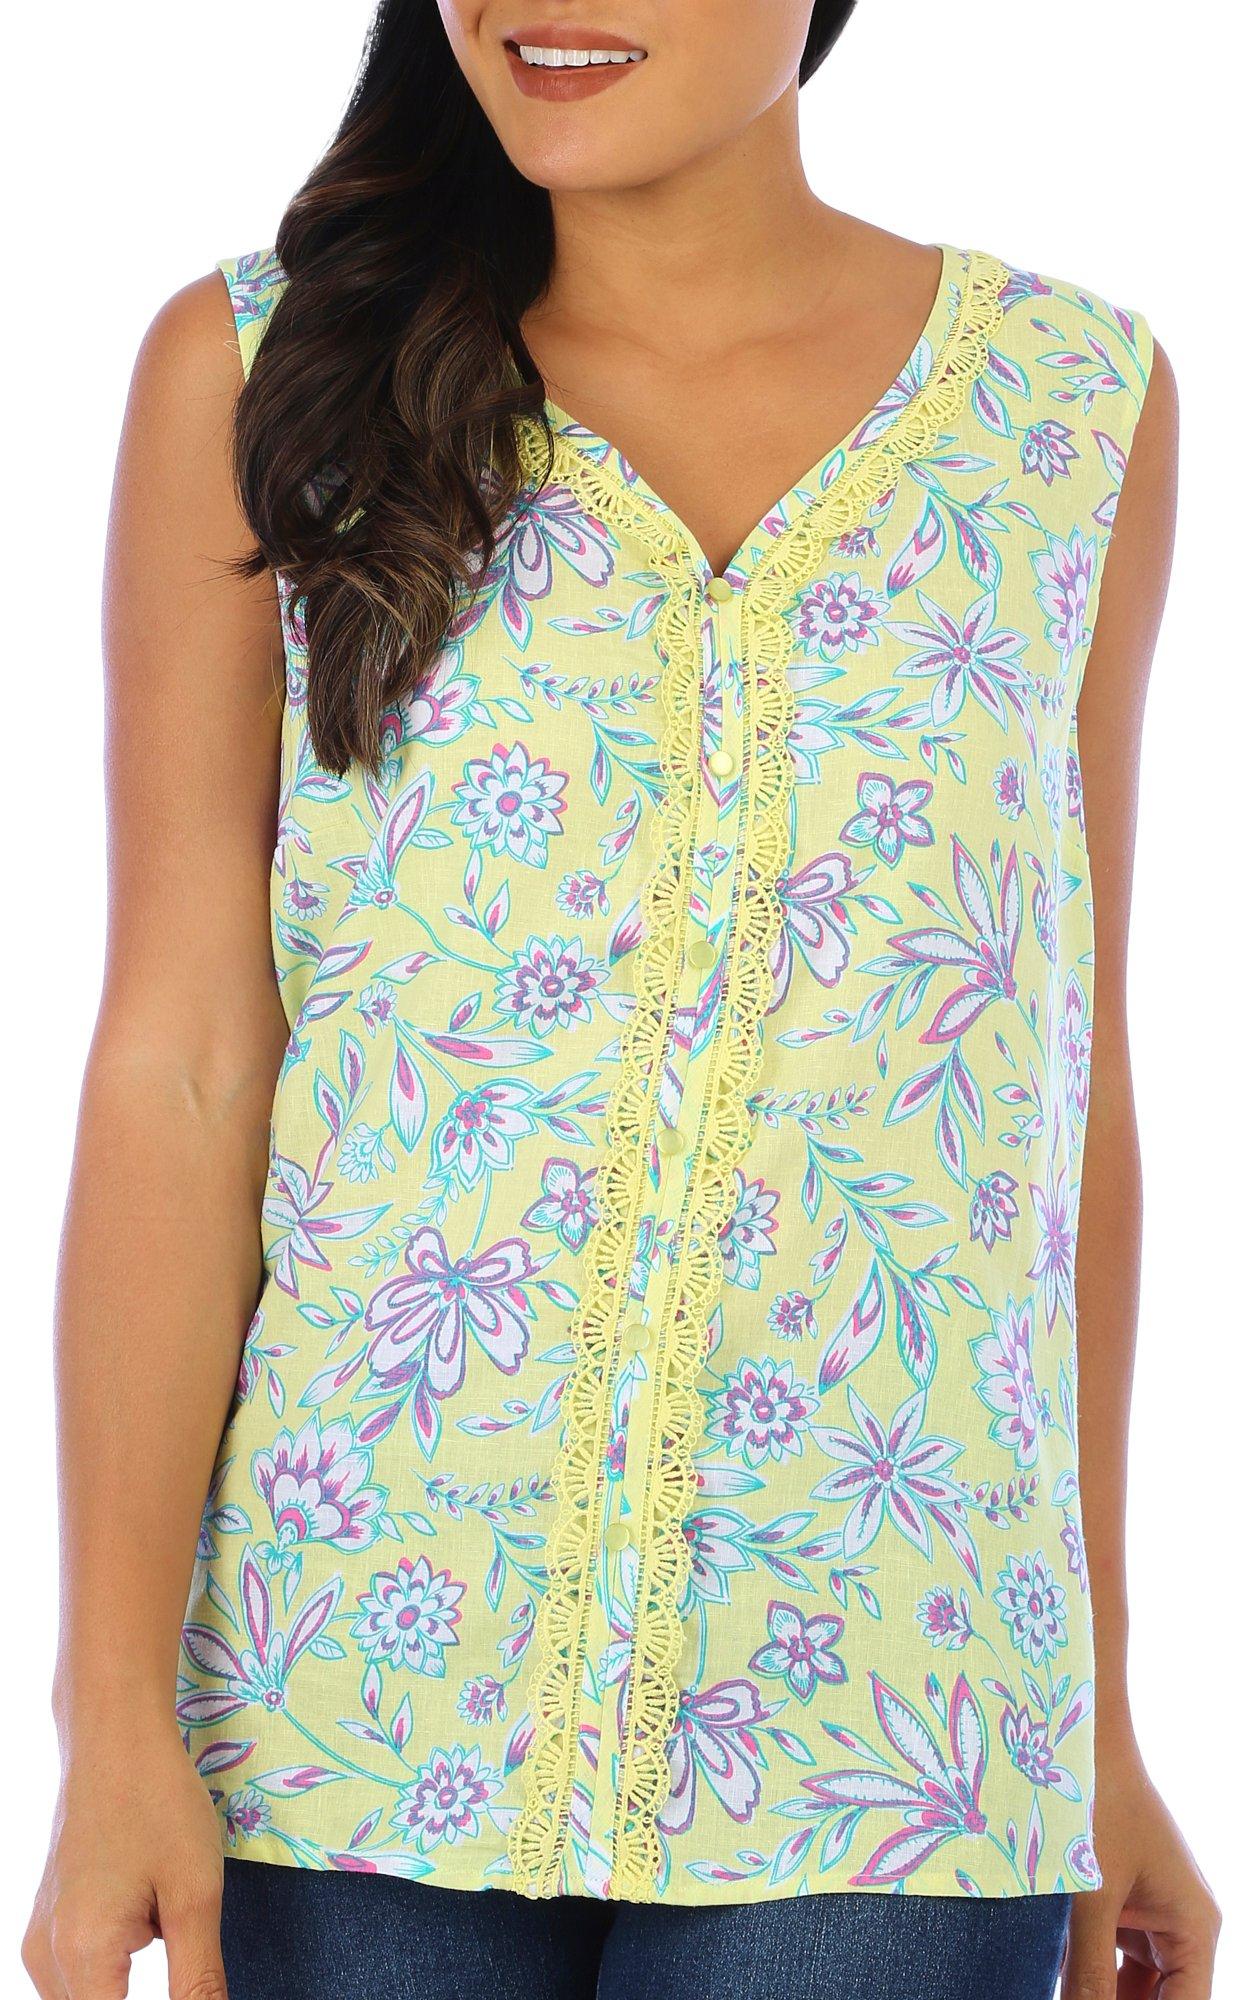 Coral Bay Womens Floral Print Button Down Sleeveless Top